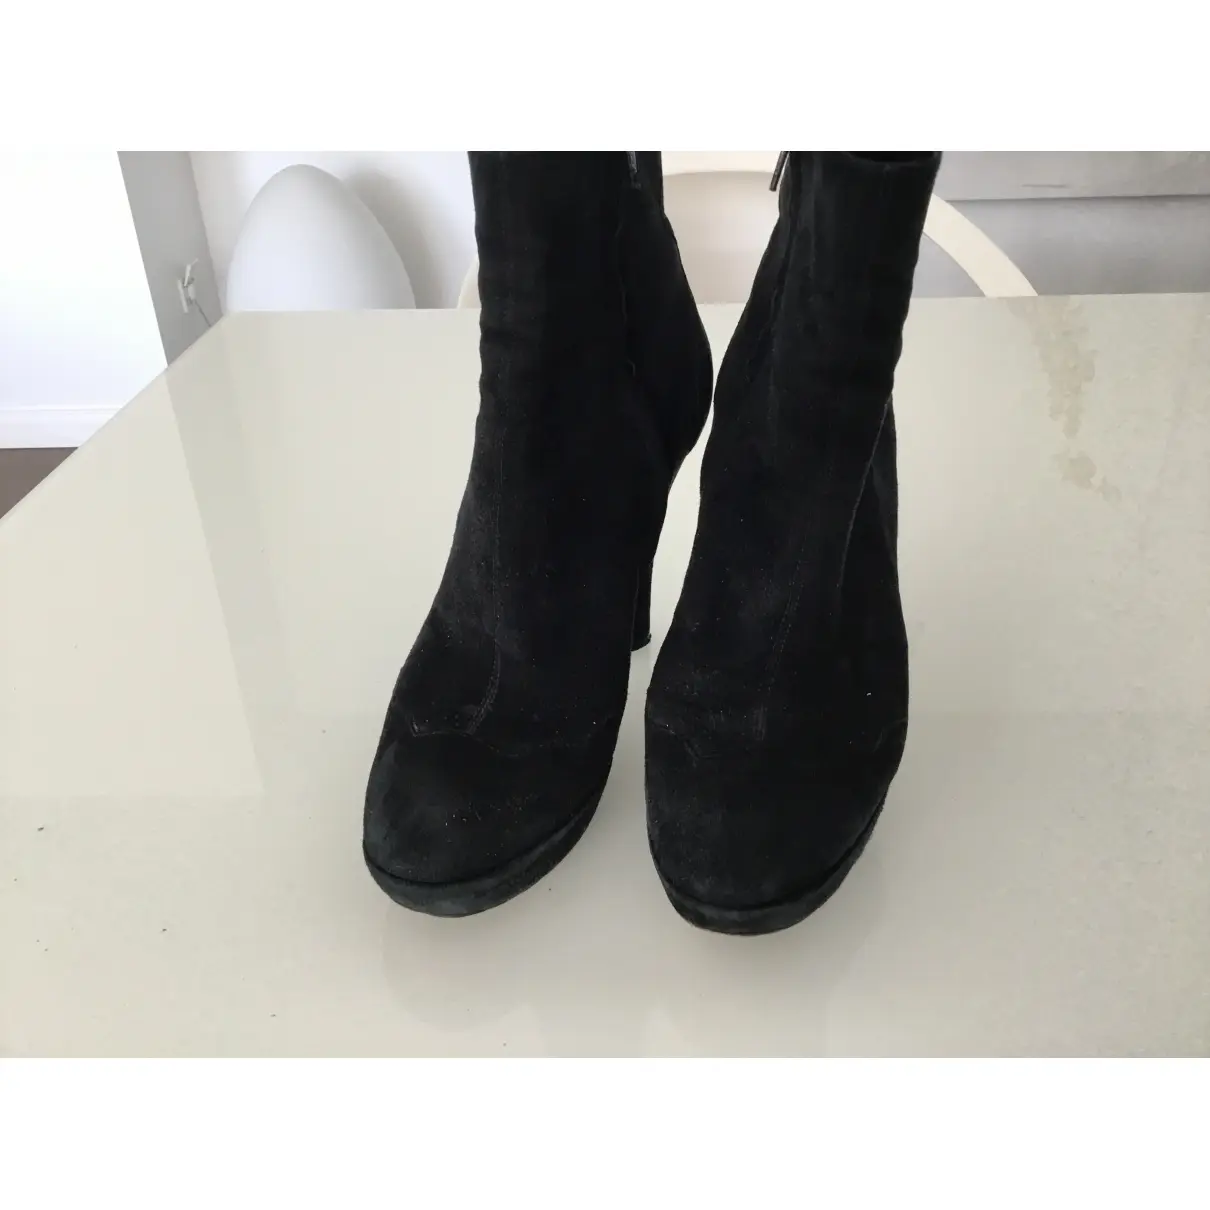 Sonia Rykiel Ankle boots for sale - Vintage